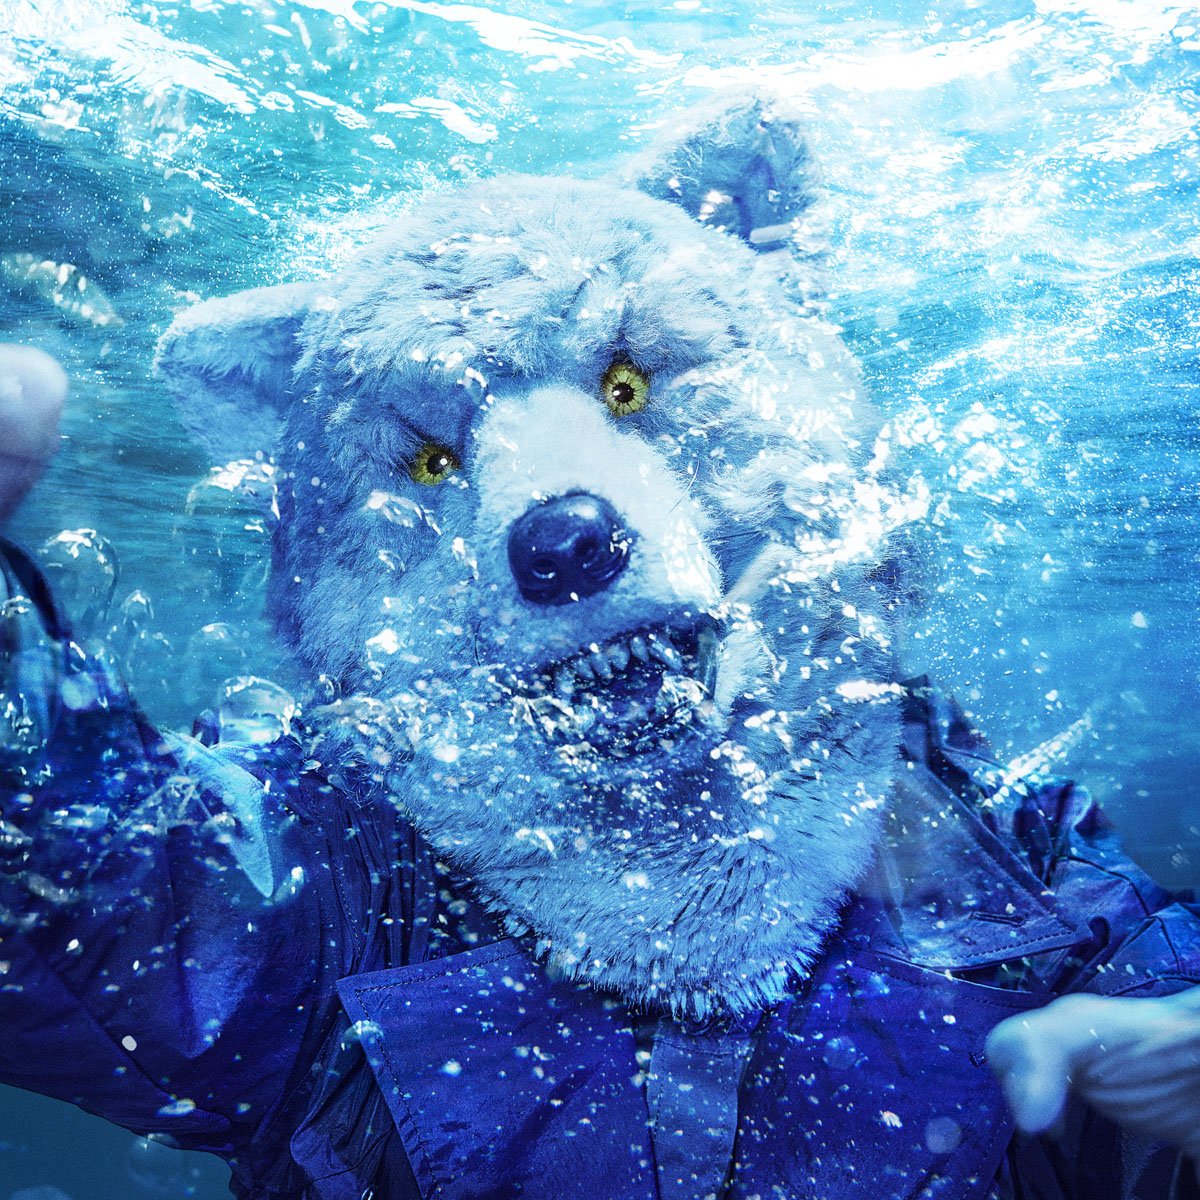 MAN WITH A MISSION INTO THE DEEP